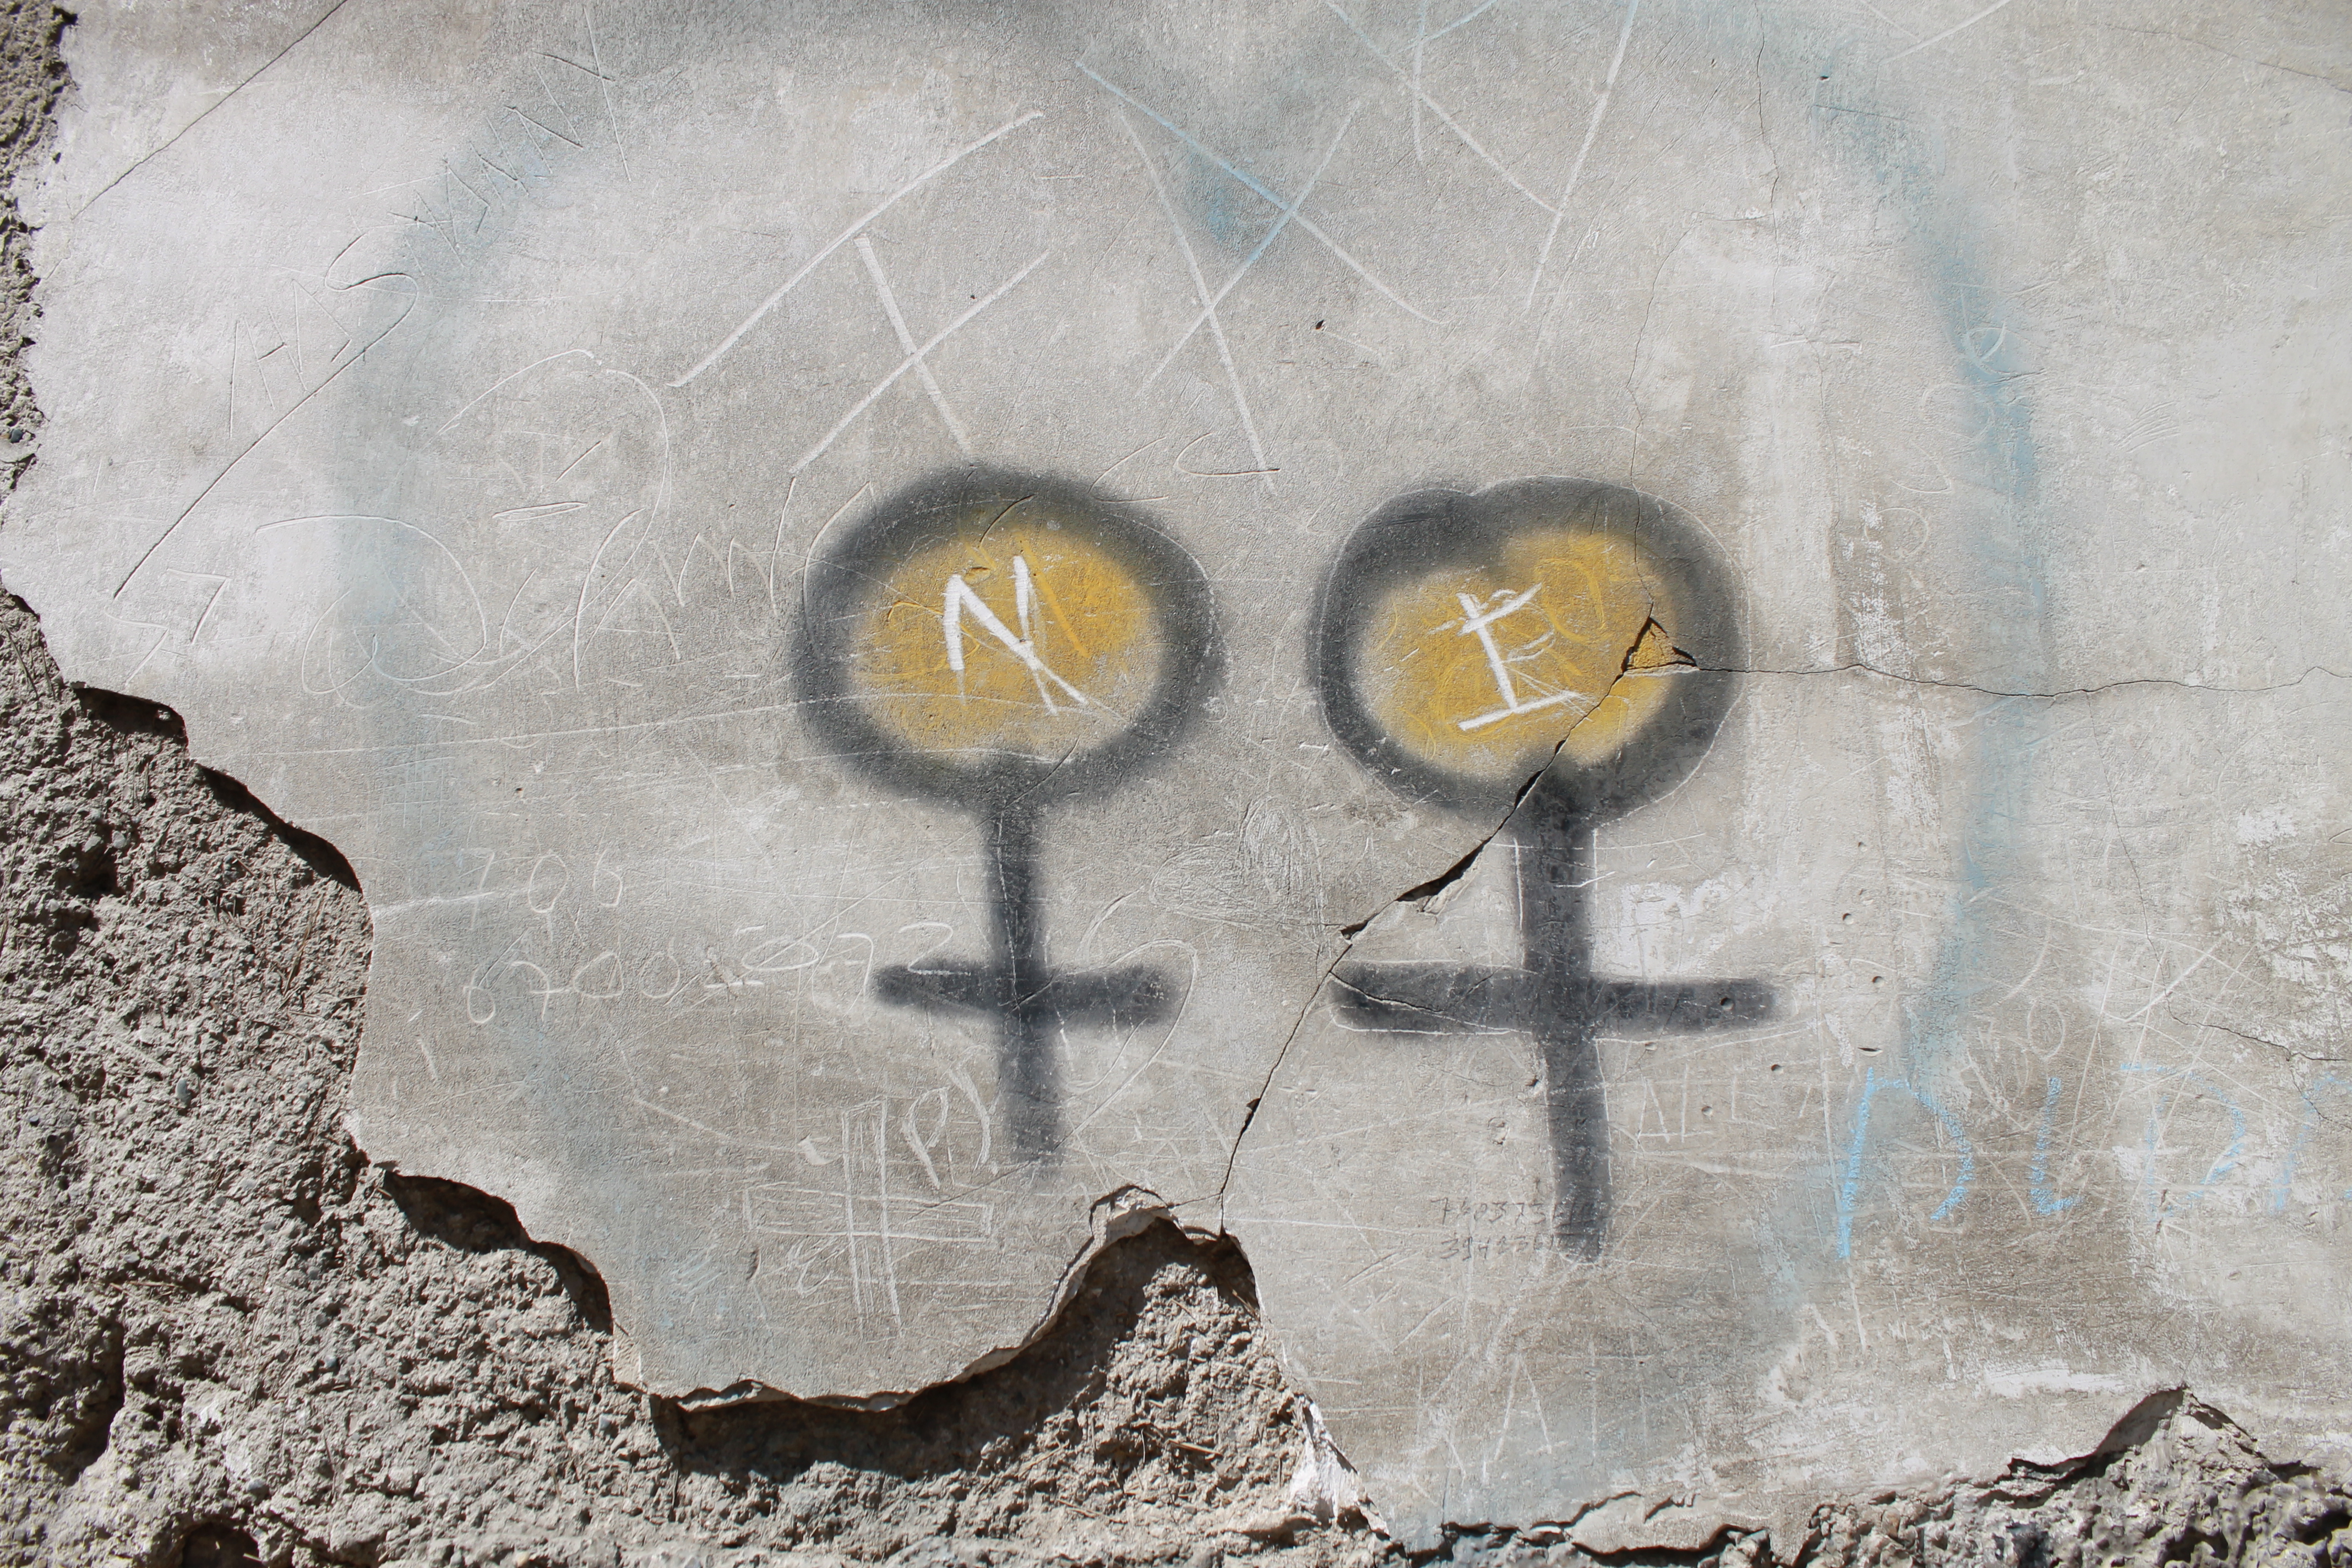 Graffiti on the exterior walls of San Pedro Penitentiary. It made me think of girls, and the girls we work with ...